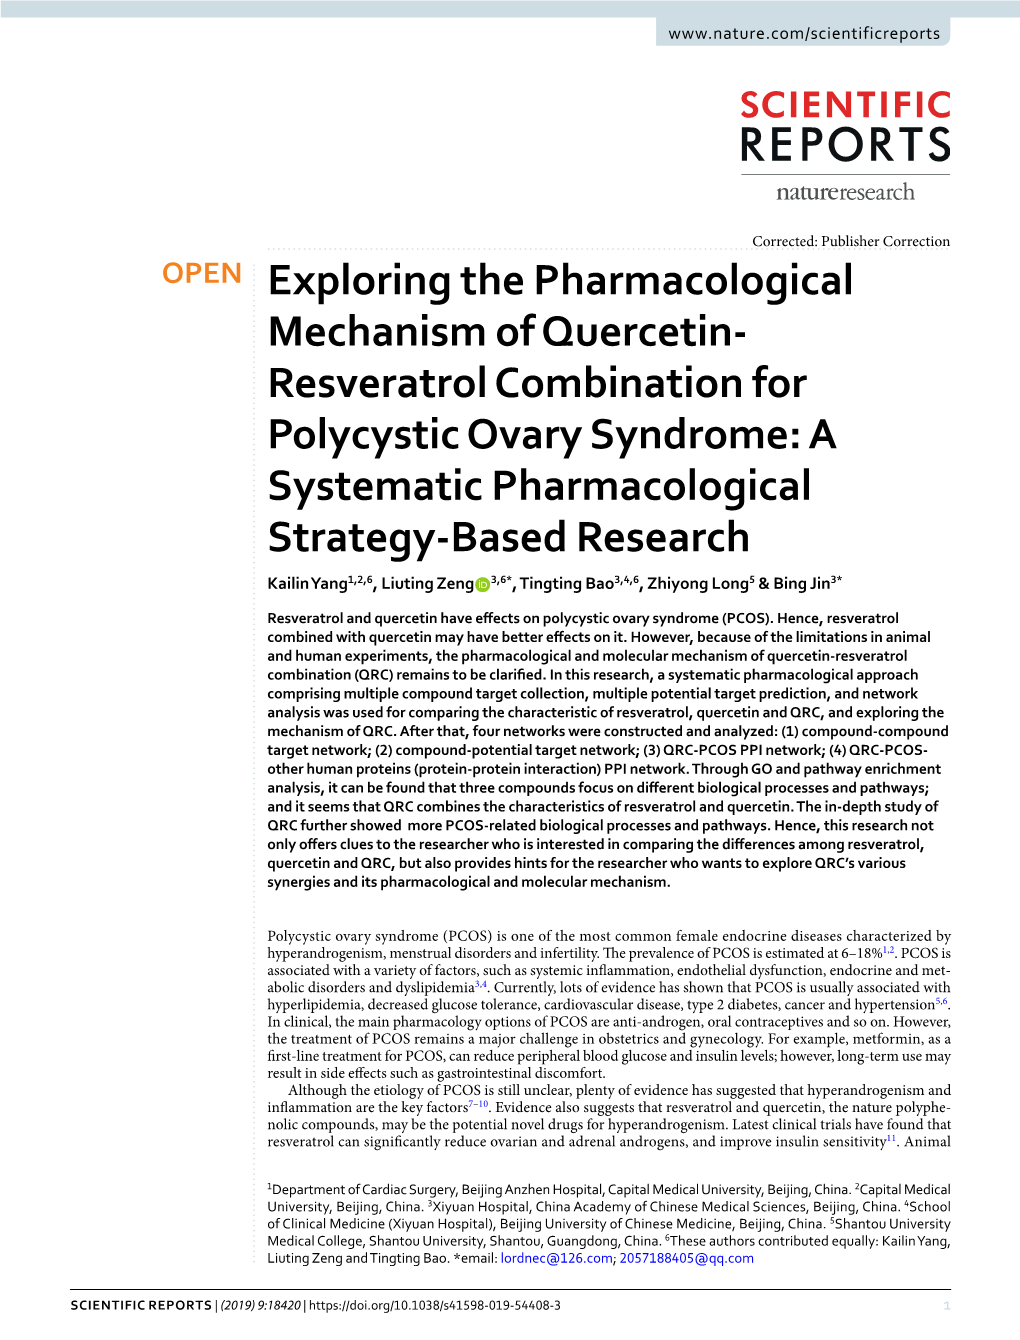 Exploring the Pharmacological Mechanism of Quercetin-Resveratrol Combination for Polycystic Ovary Syndrome